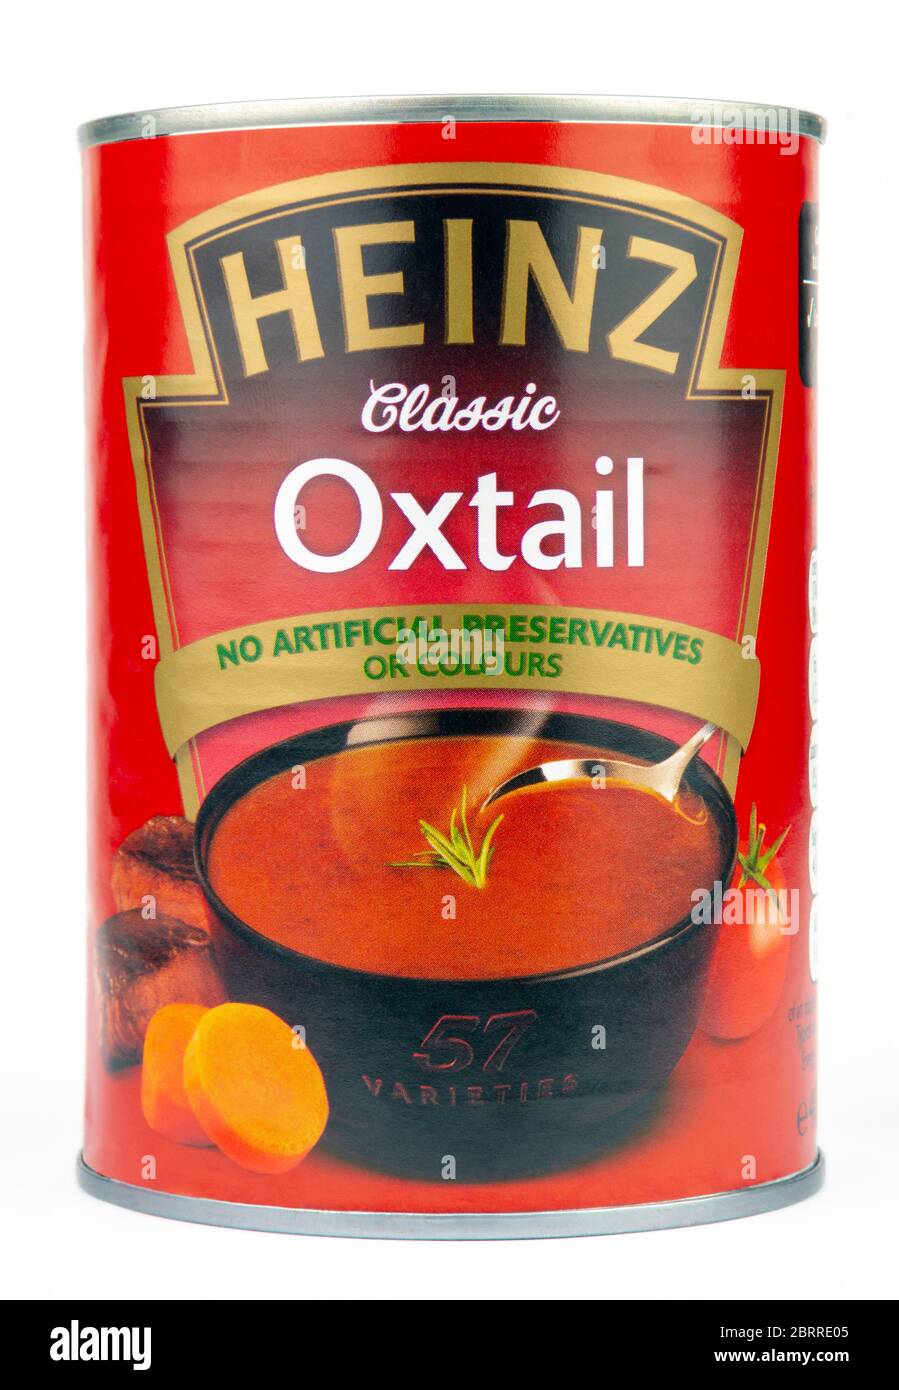 Coventry, West Midlands, UK - May 13, 2020: Heinz classic oxtail soup can unopened on an isolated white background Stock Photo